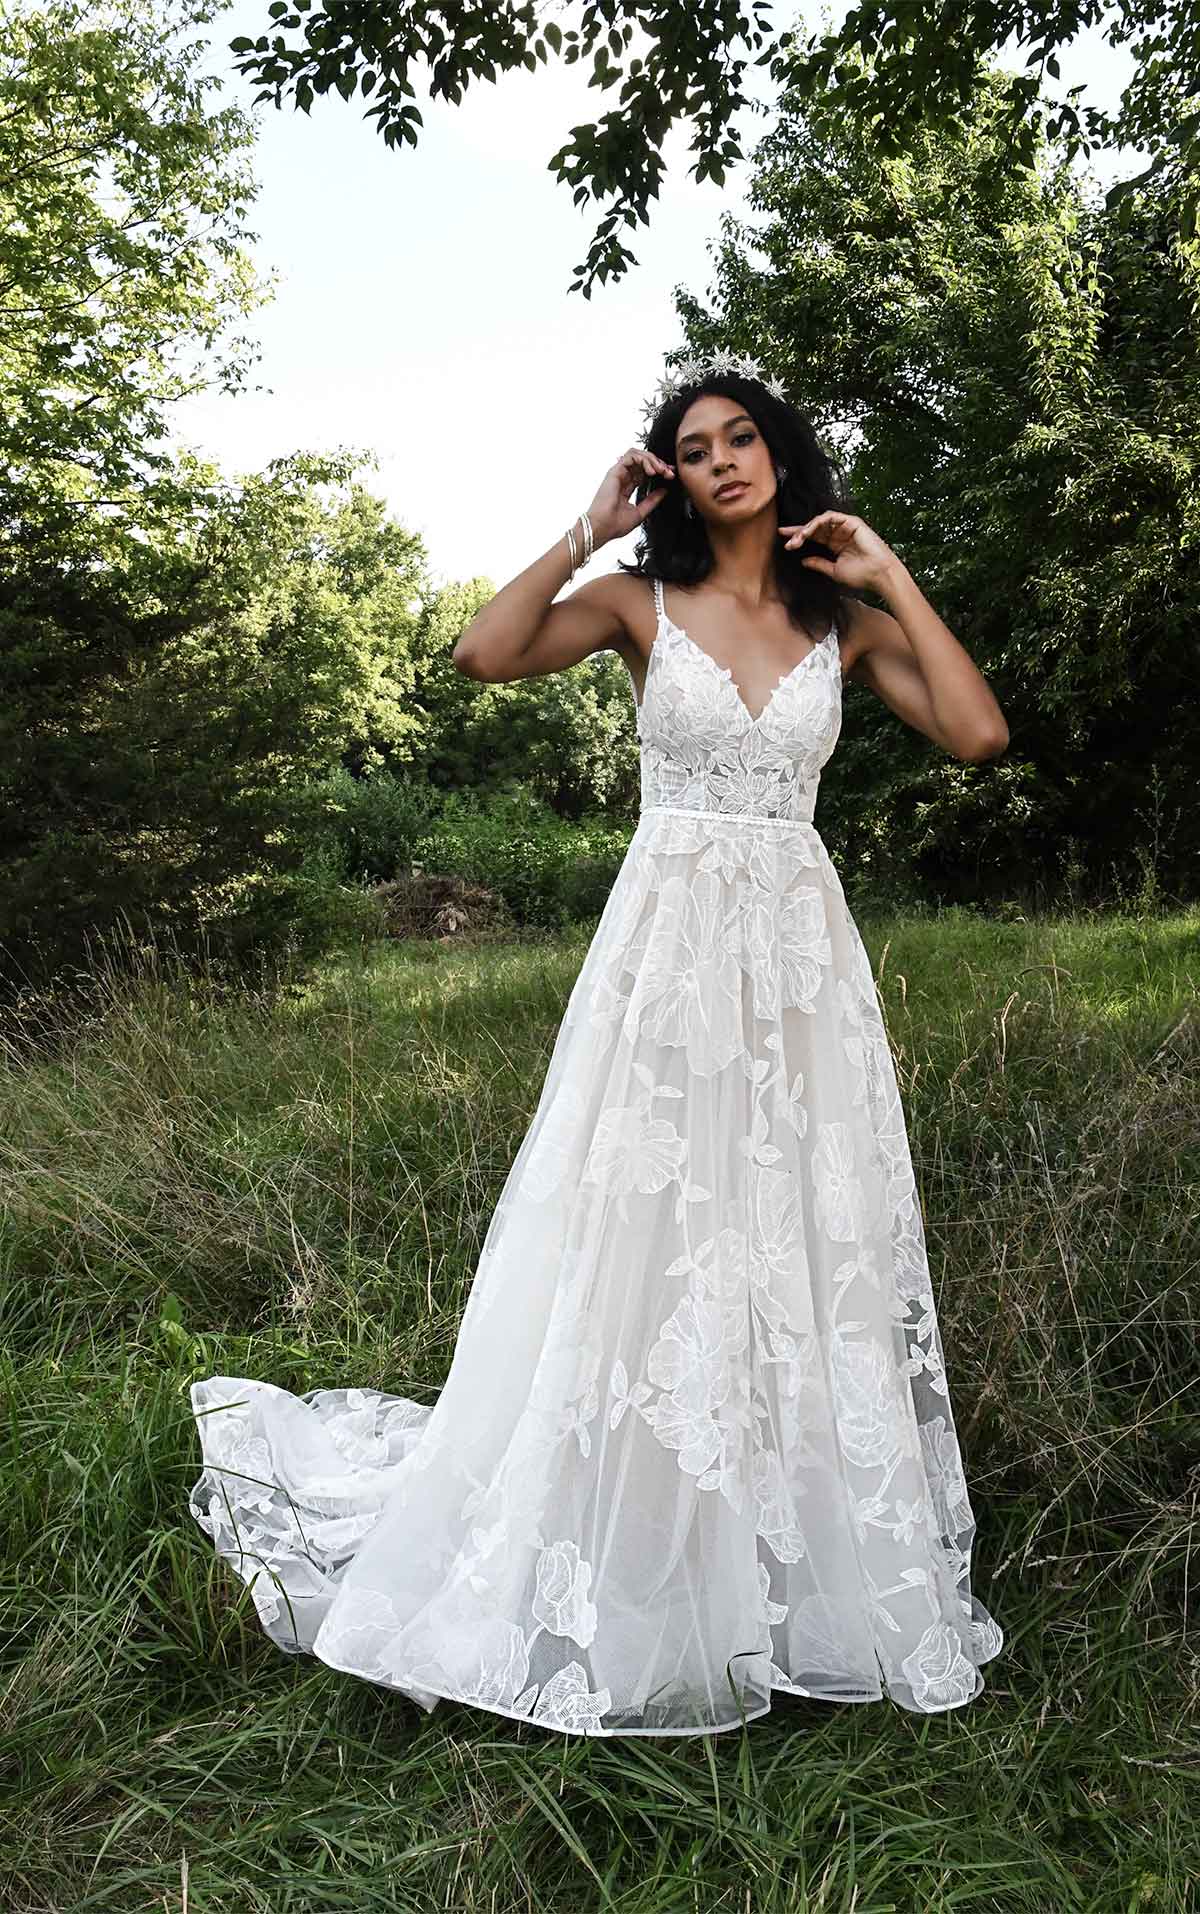 ASPEN Dreamy Boho Wedding Dress with Open Back and Botanical Lace Details by All Who Wander